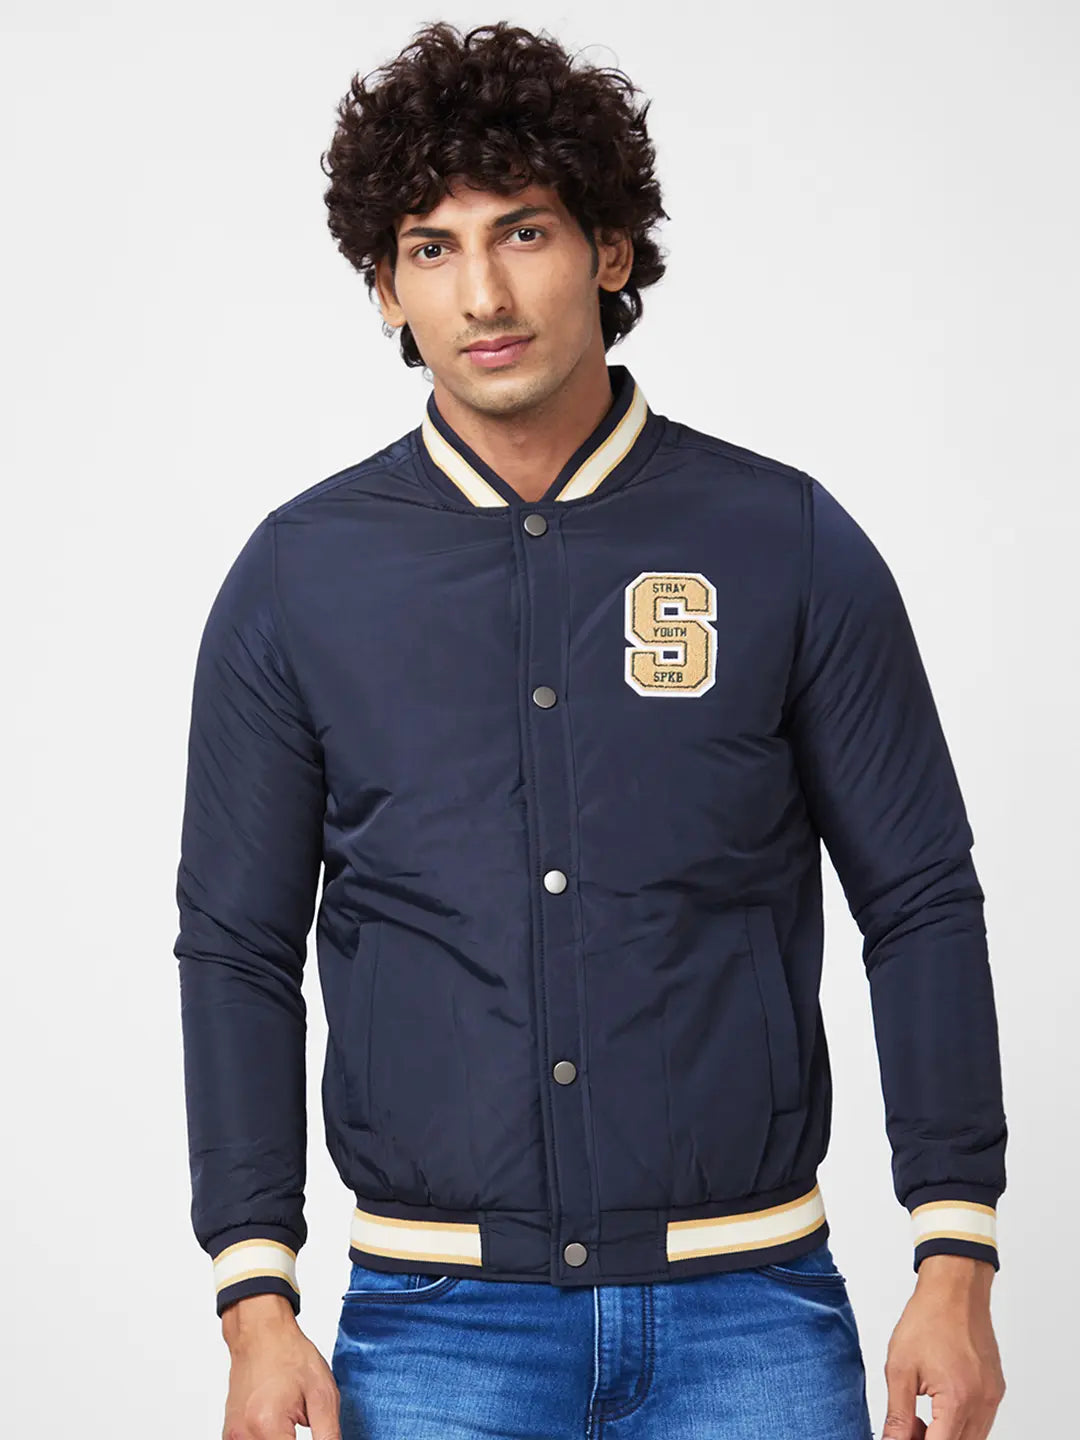 MEN'S VARSITY JACKET WITH TOWEL EMBROIDERY BADGES